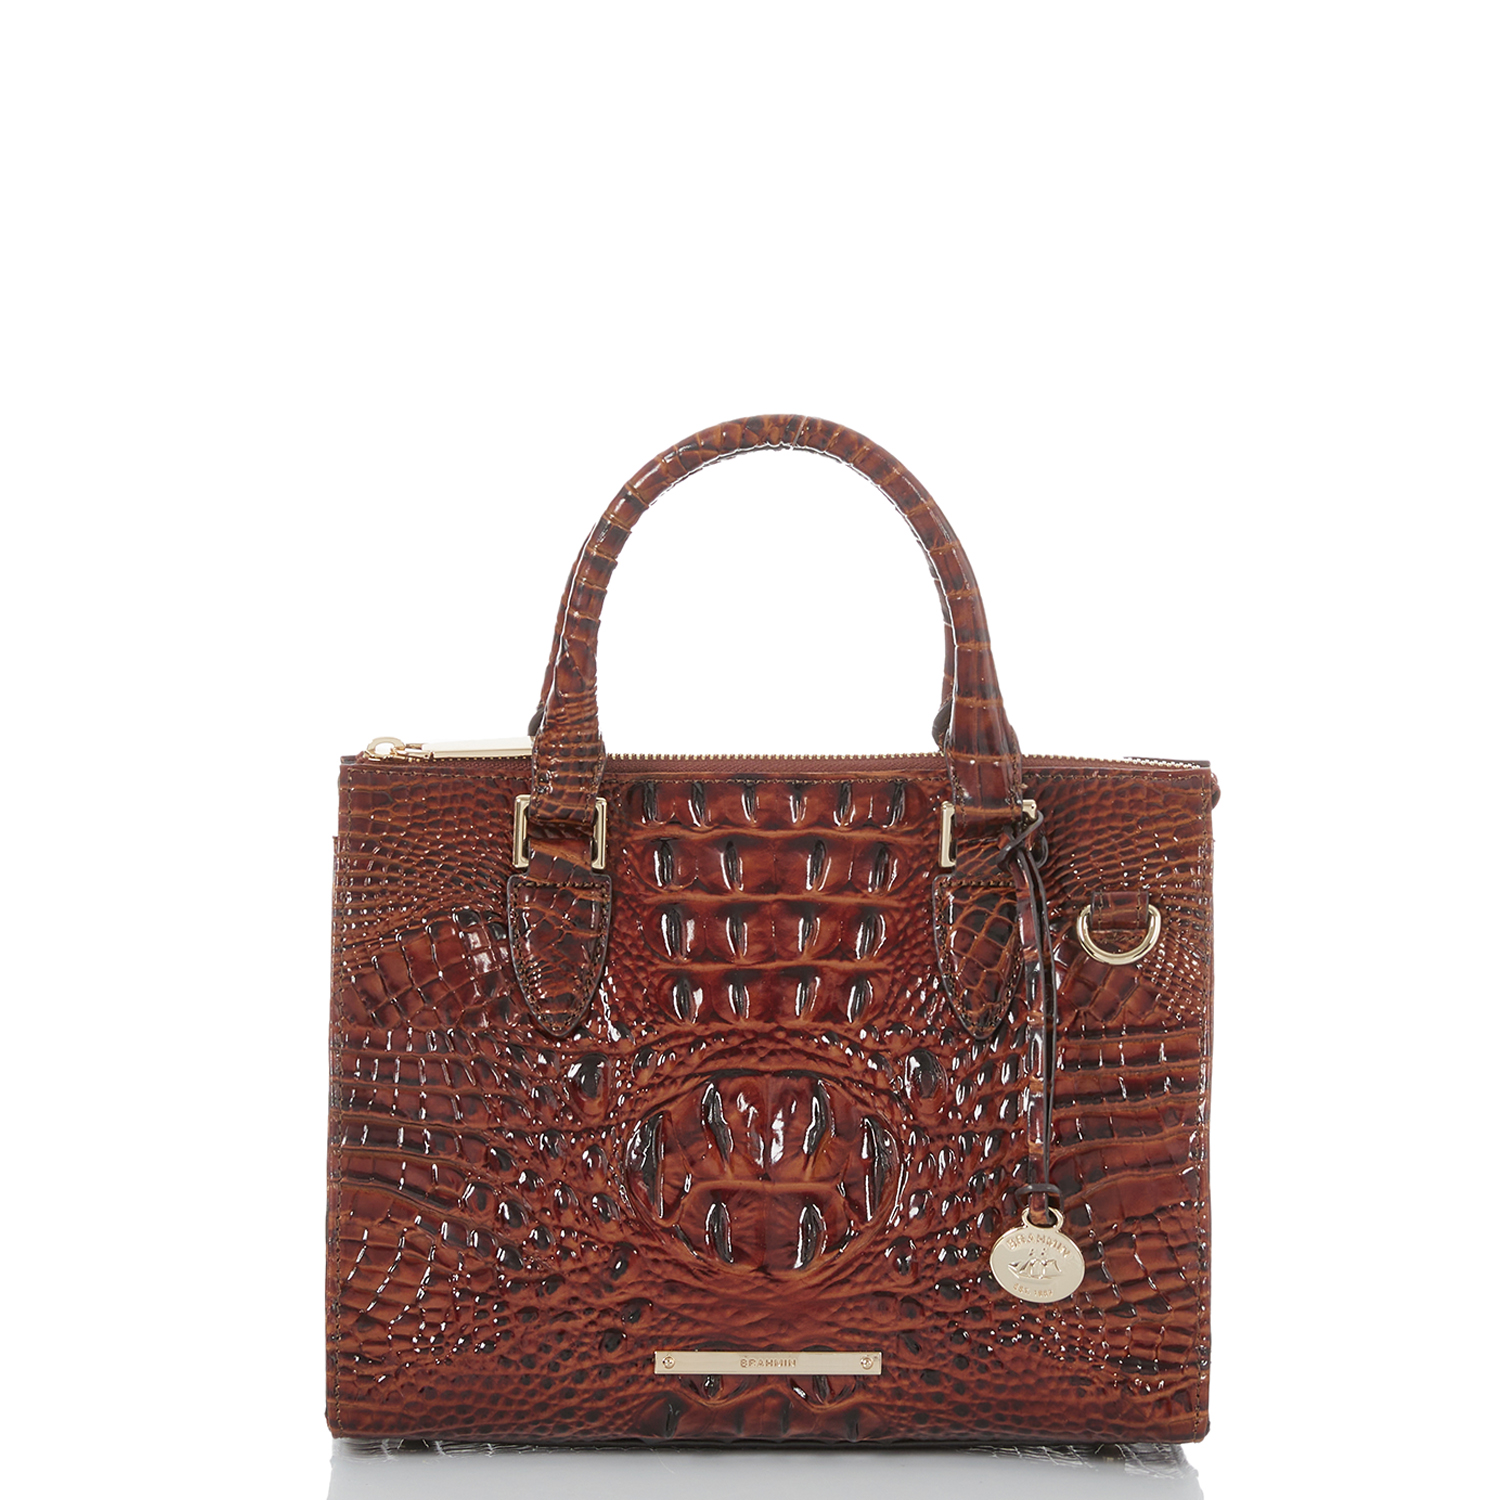 Buy Brahmin Products Online at Best Prices in India | Ubuy